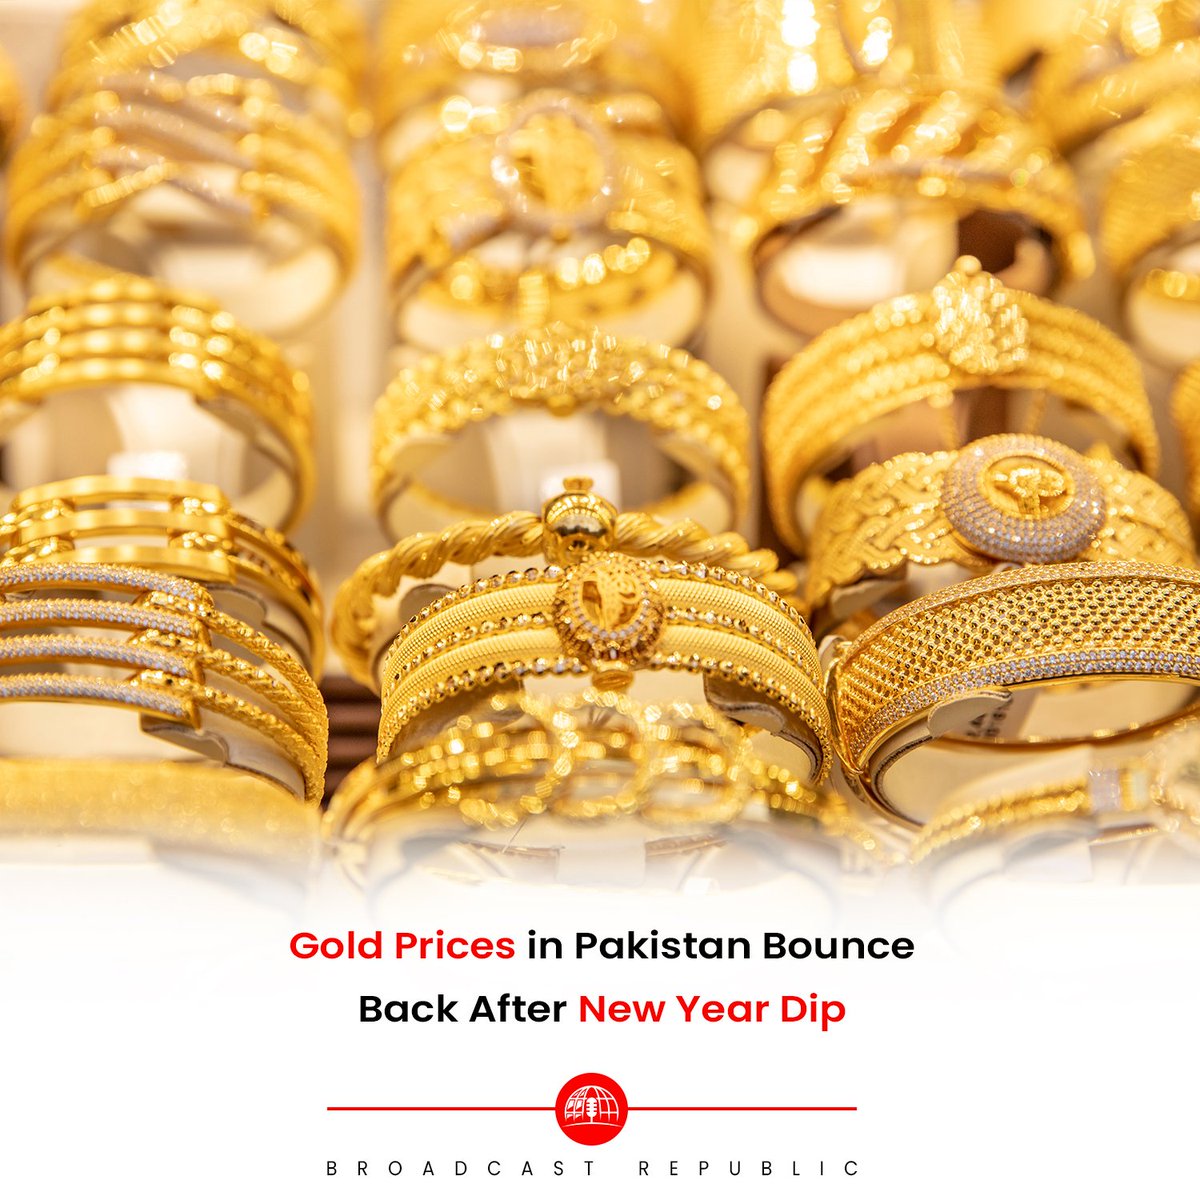 After a slight dip on the first day of the New Year, the price of gold in Pakistan rebounded, settling at Rs. 221,300 per tola on Tuesday.

#BroadcastRepublic #GoldPrice #PakistanMarket #EconomicNews #GoldMarket #GlobalGoldPrices